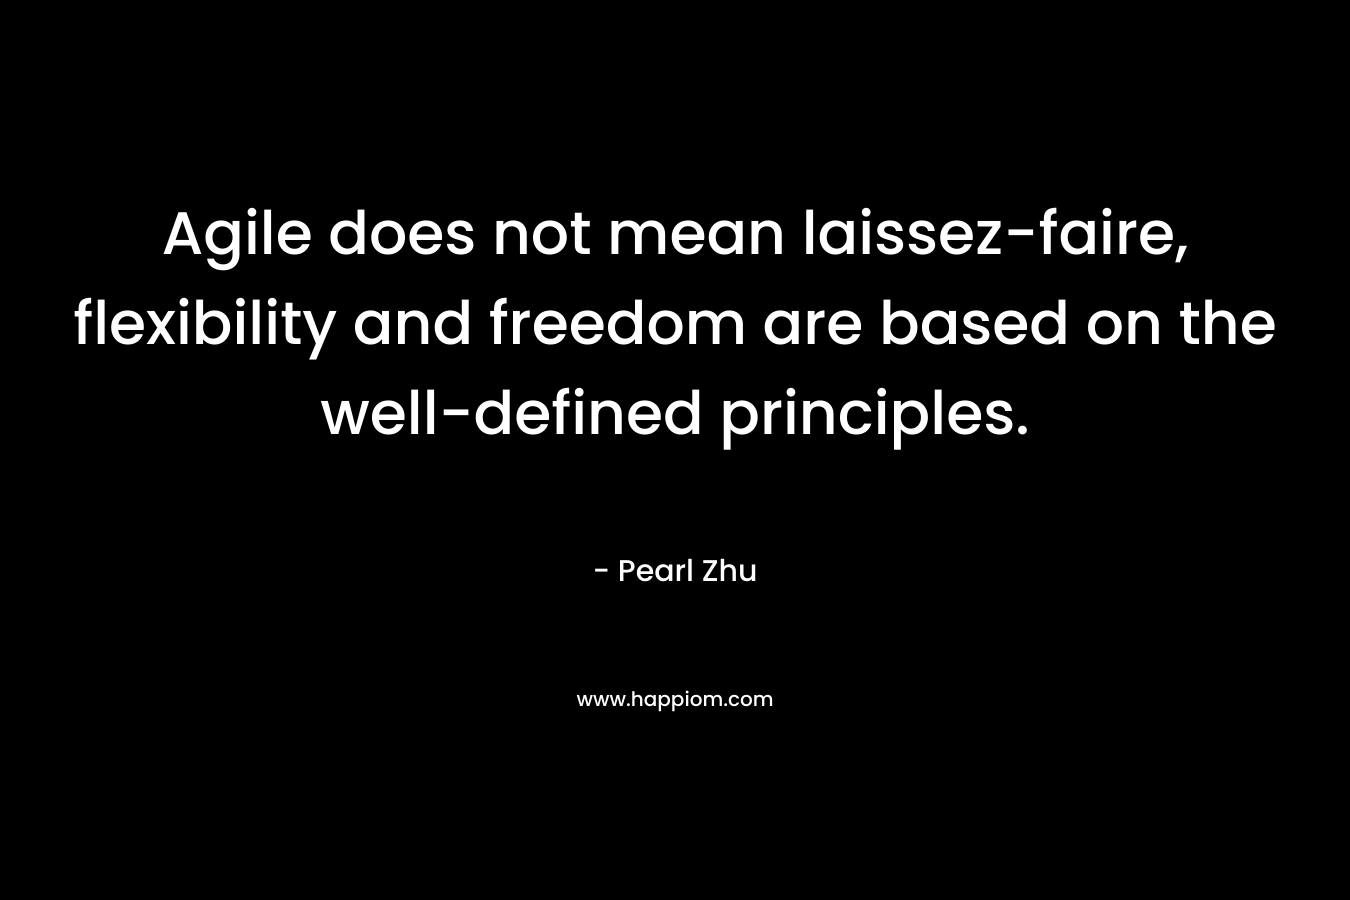 Agile does not mean laissez-faire, flexibility and freedom are based on the well-defined principles.